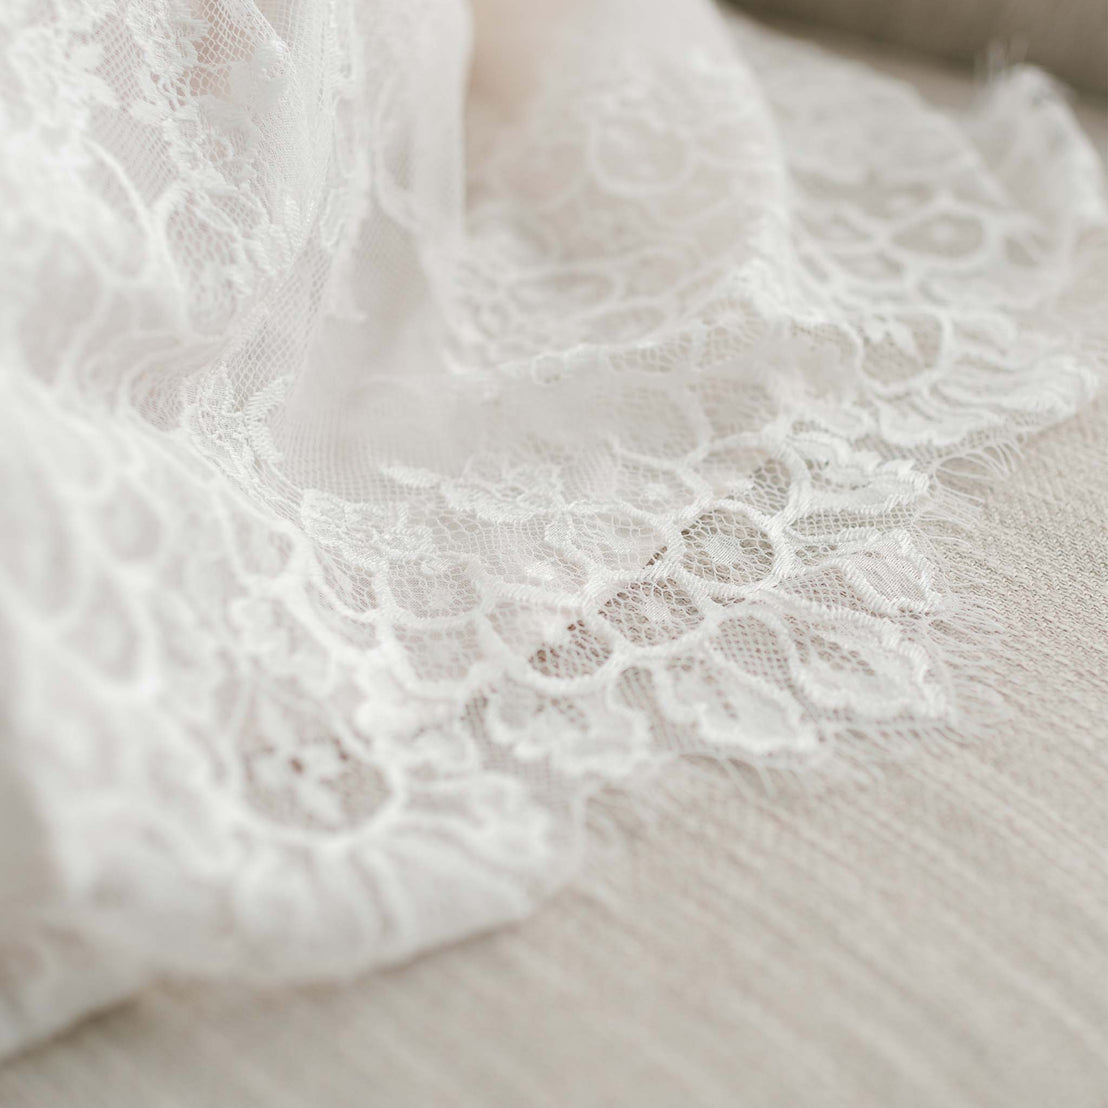 Close-up of delicate white lace fabric with intricate floral patterns, handcrafted and draped softly over a textured surface, highlighting the luxury and fine details of the Juliette Romper Dress embroidery.